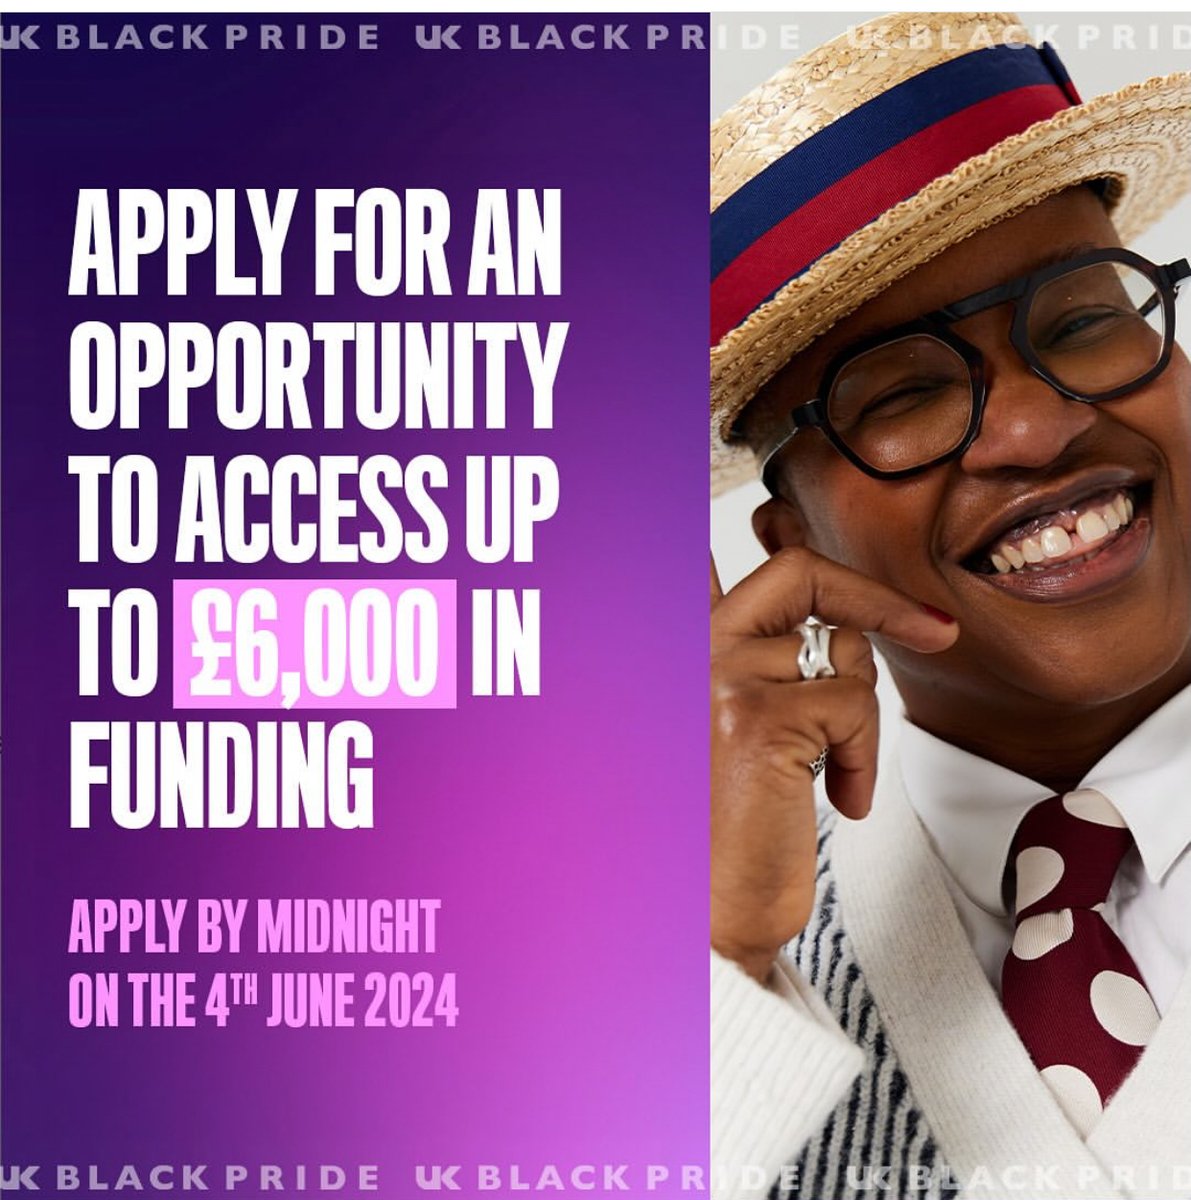 🎉 Exciting news from our friends @ukblackpride... They are thrilled to announce the launch of their 2024 #CommunityActionFund. This fund will provide support to organisations that champion #LGBTQI+ Black individuals and people of colour across the UK. ukblackpride.org.uk/community-acti…